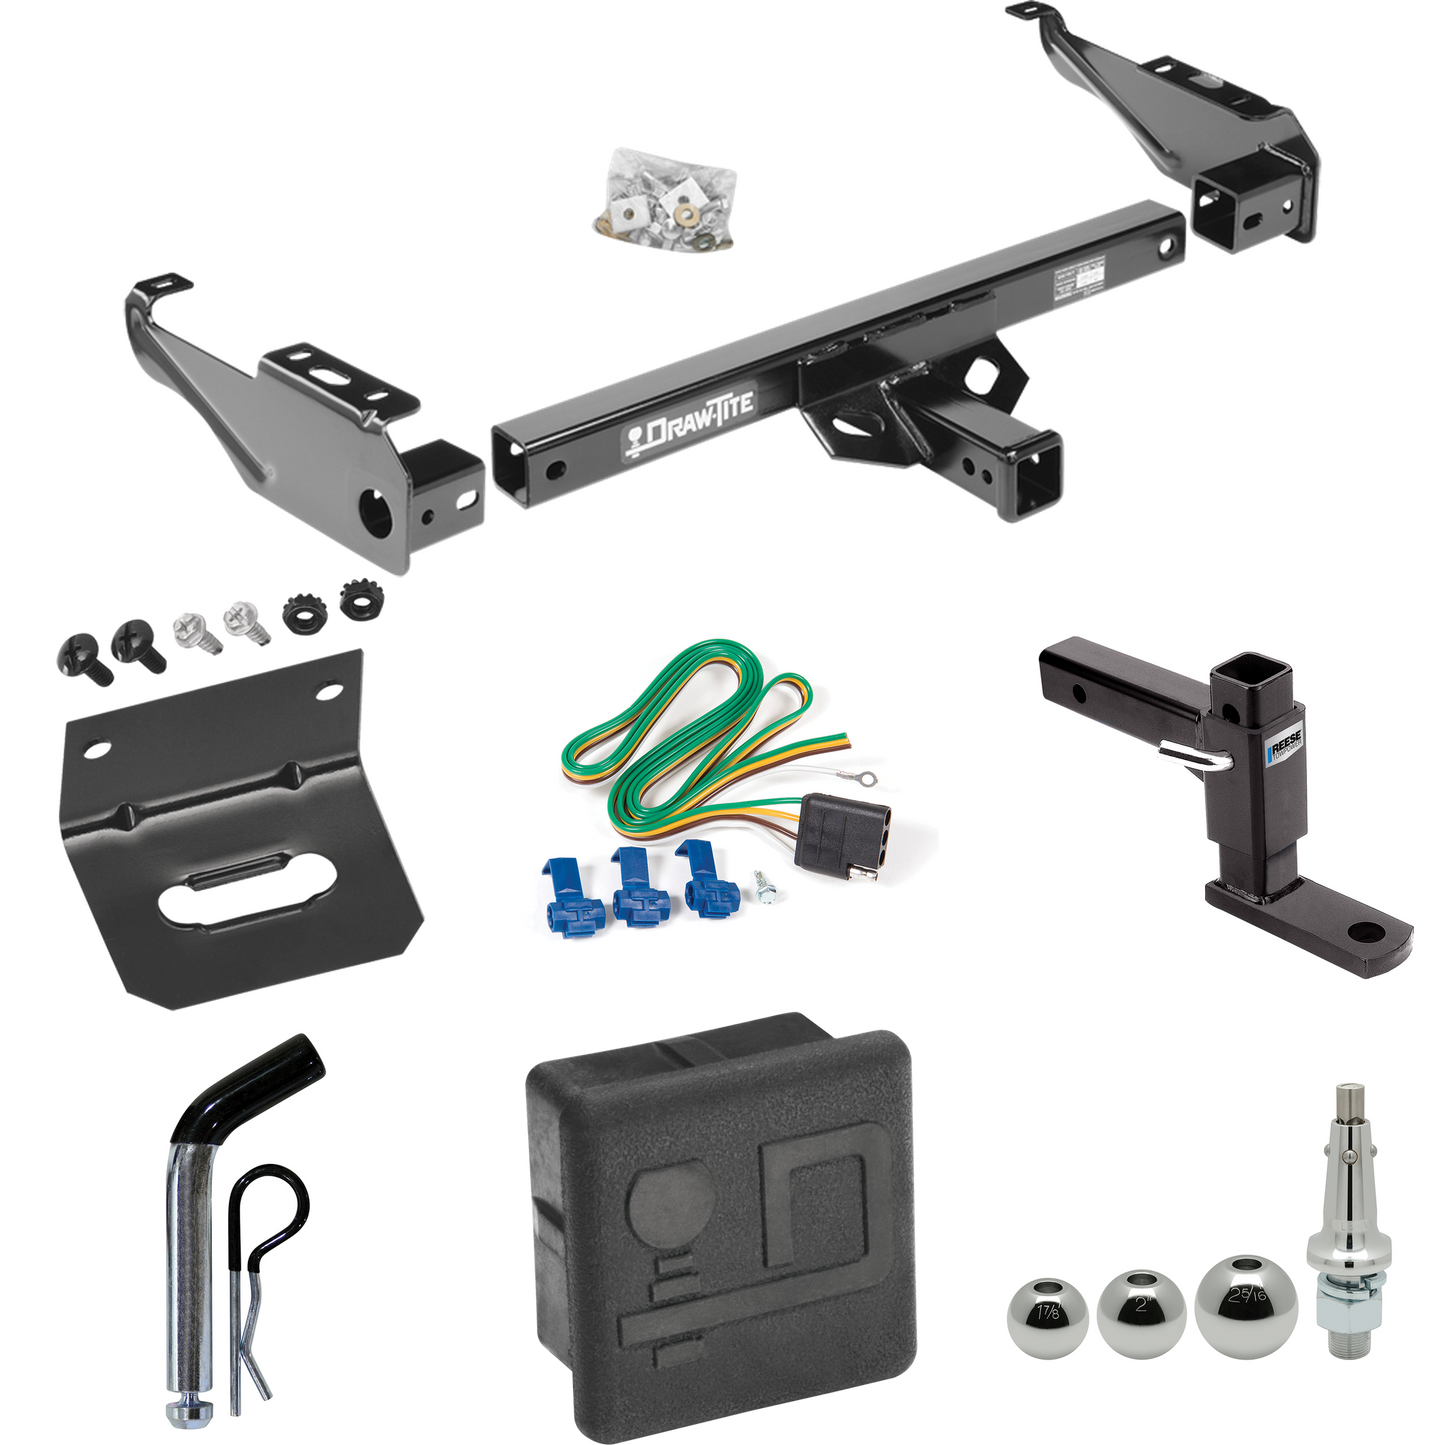 Fits 1963-1966 GMC 3500 Trailer Hitch Tow PKG w/ 4-Flat Wiring + Adjustable Drop Rise Ball Mount + Pin/Clip + Inerchangeable 1-7/8" & 2" & 2-5/16" Balls + Wiring Bracket + Hitch Cover By Draw-Tite